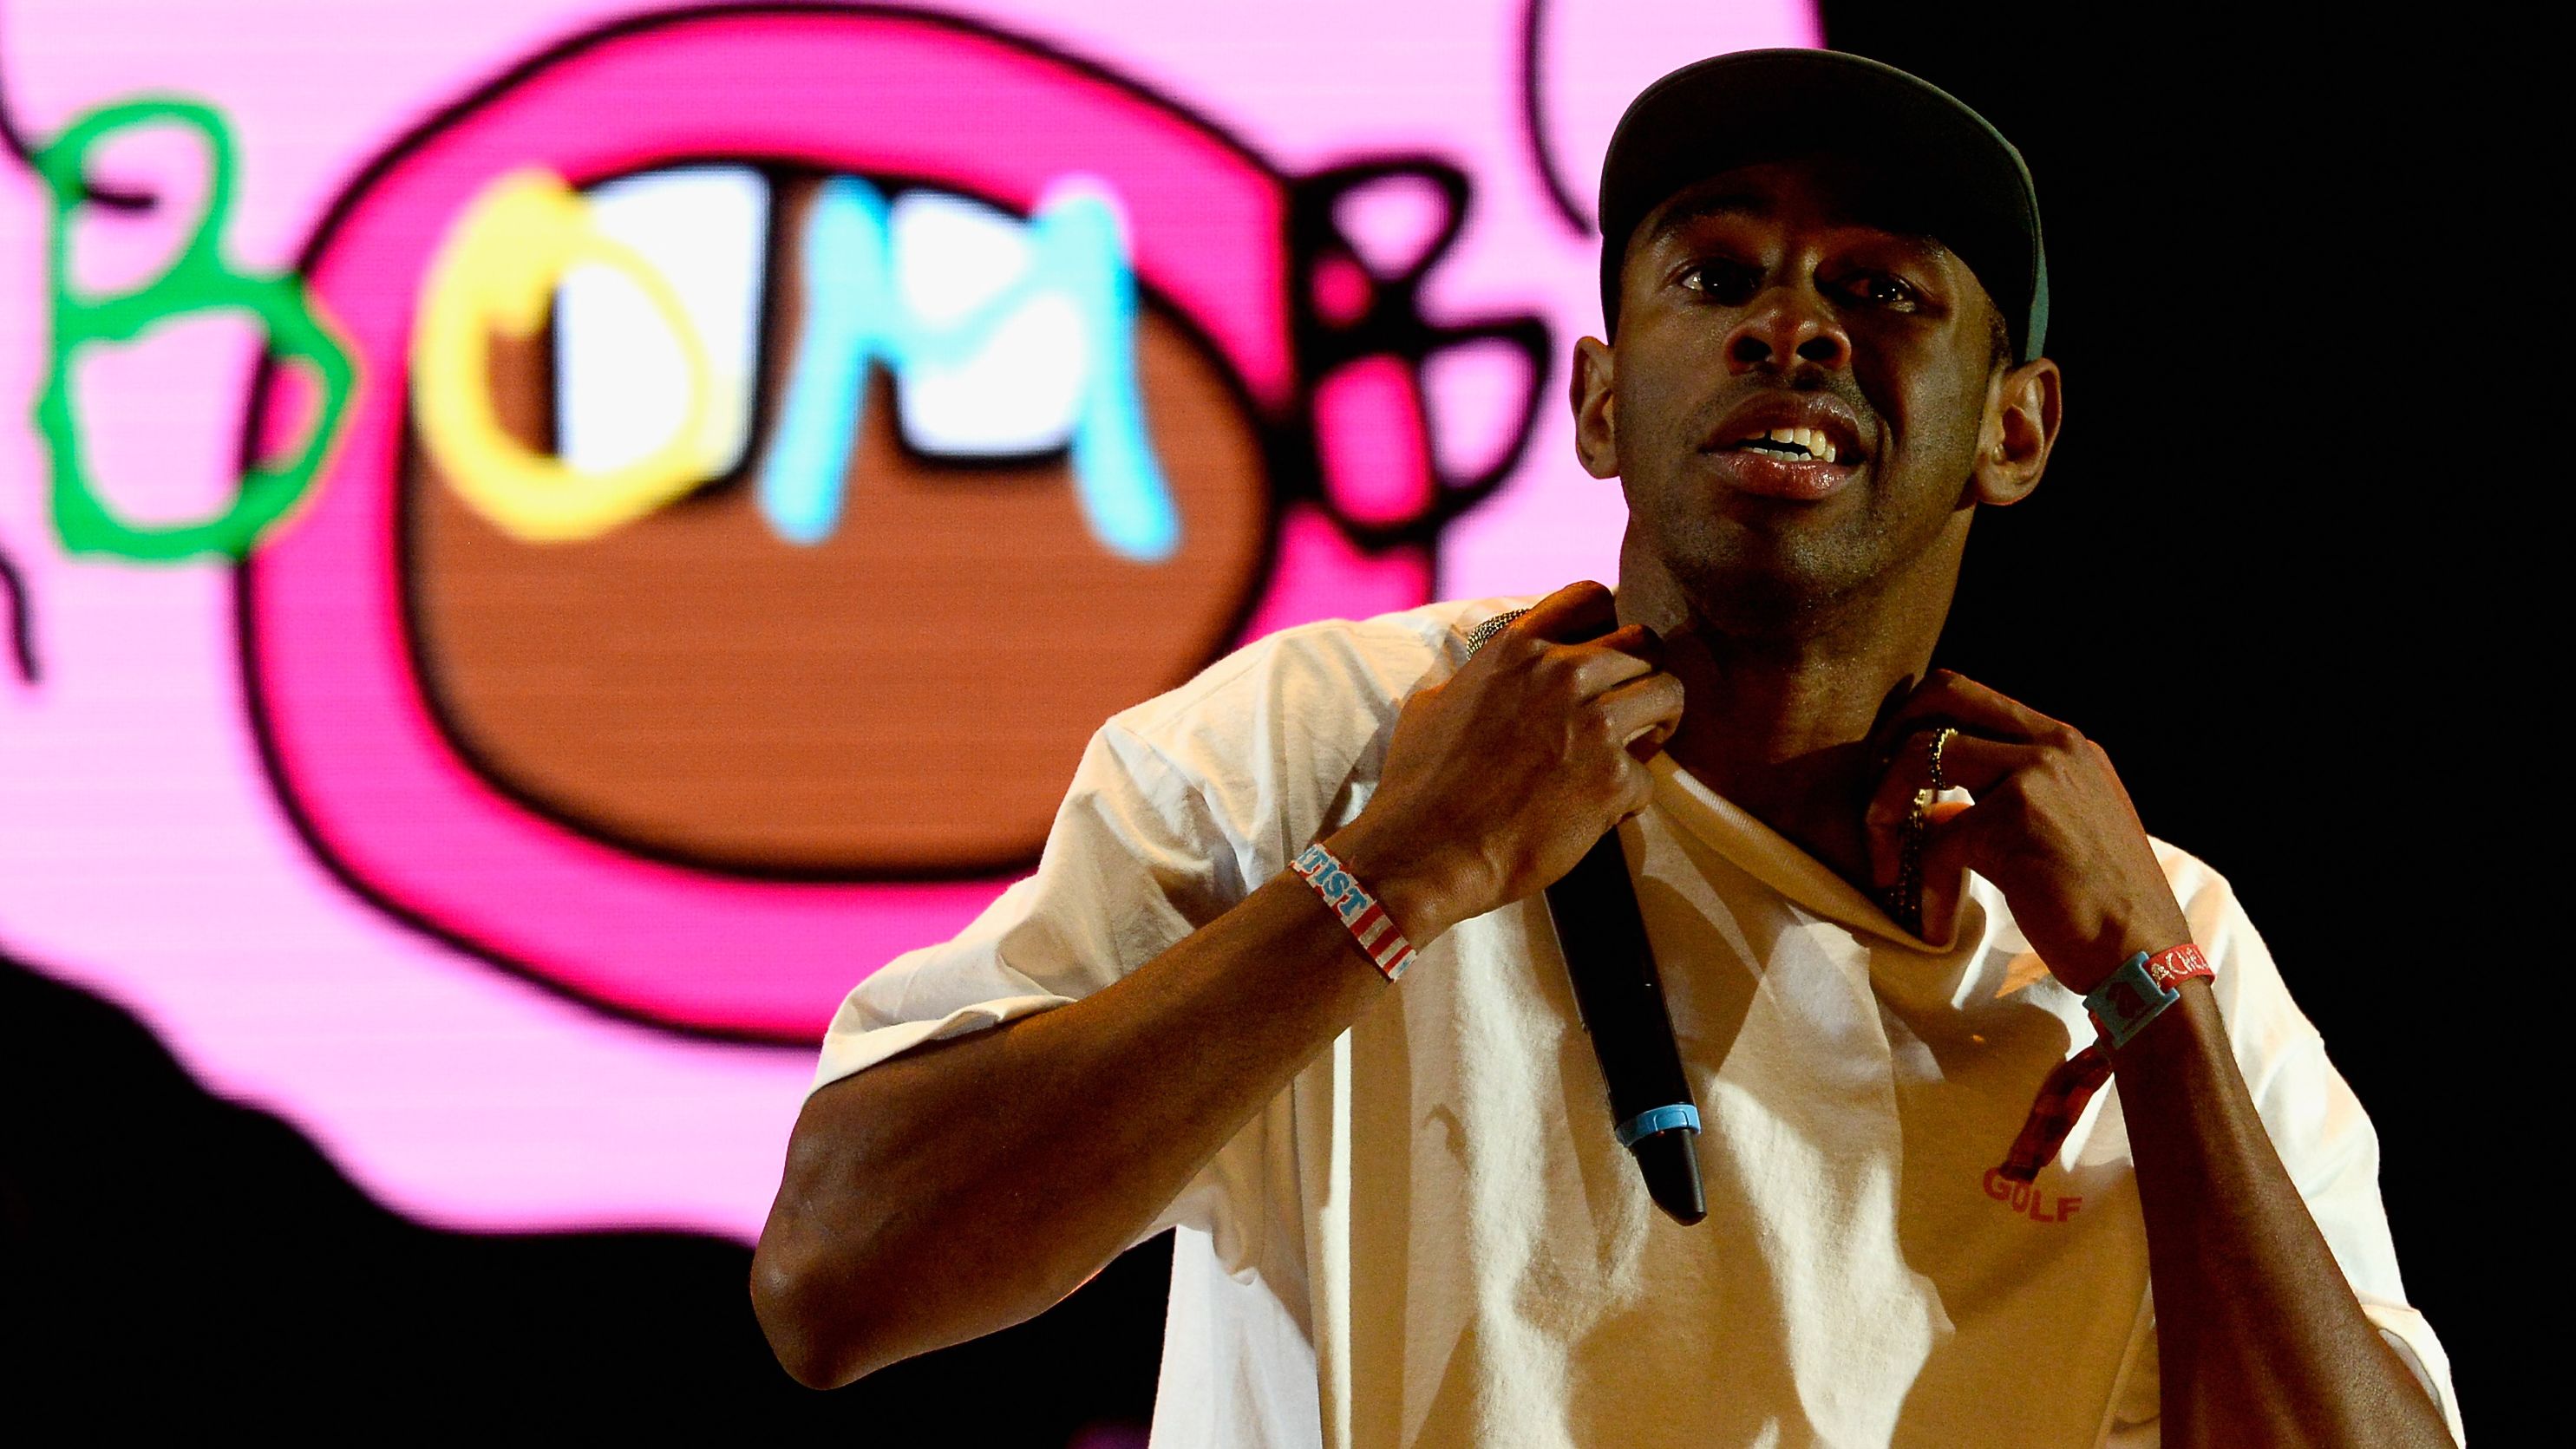 Rapper Tyler the Creator performs at the Coachella Valley Music and Arts Festival 2015.